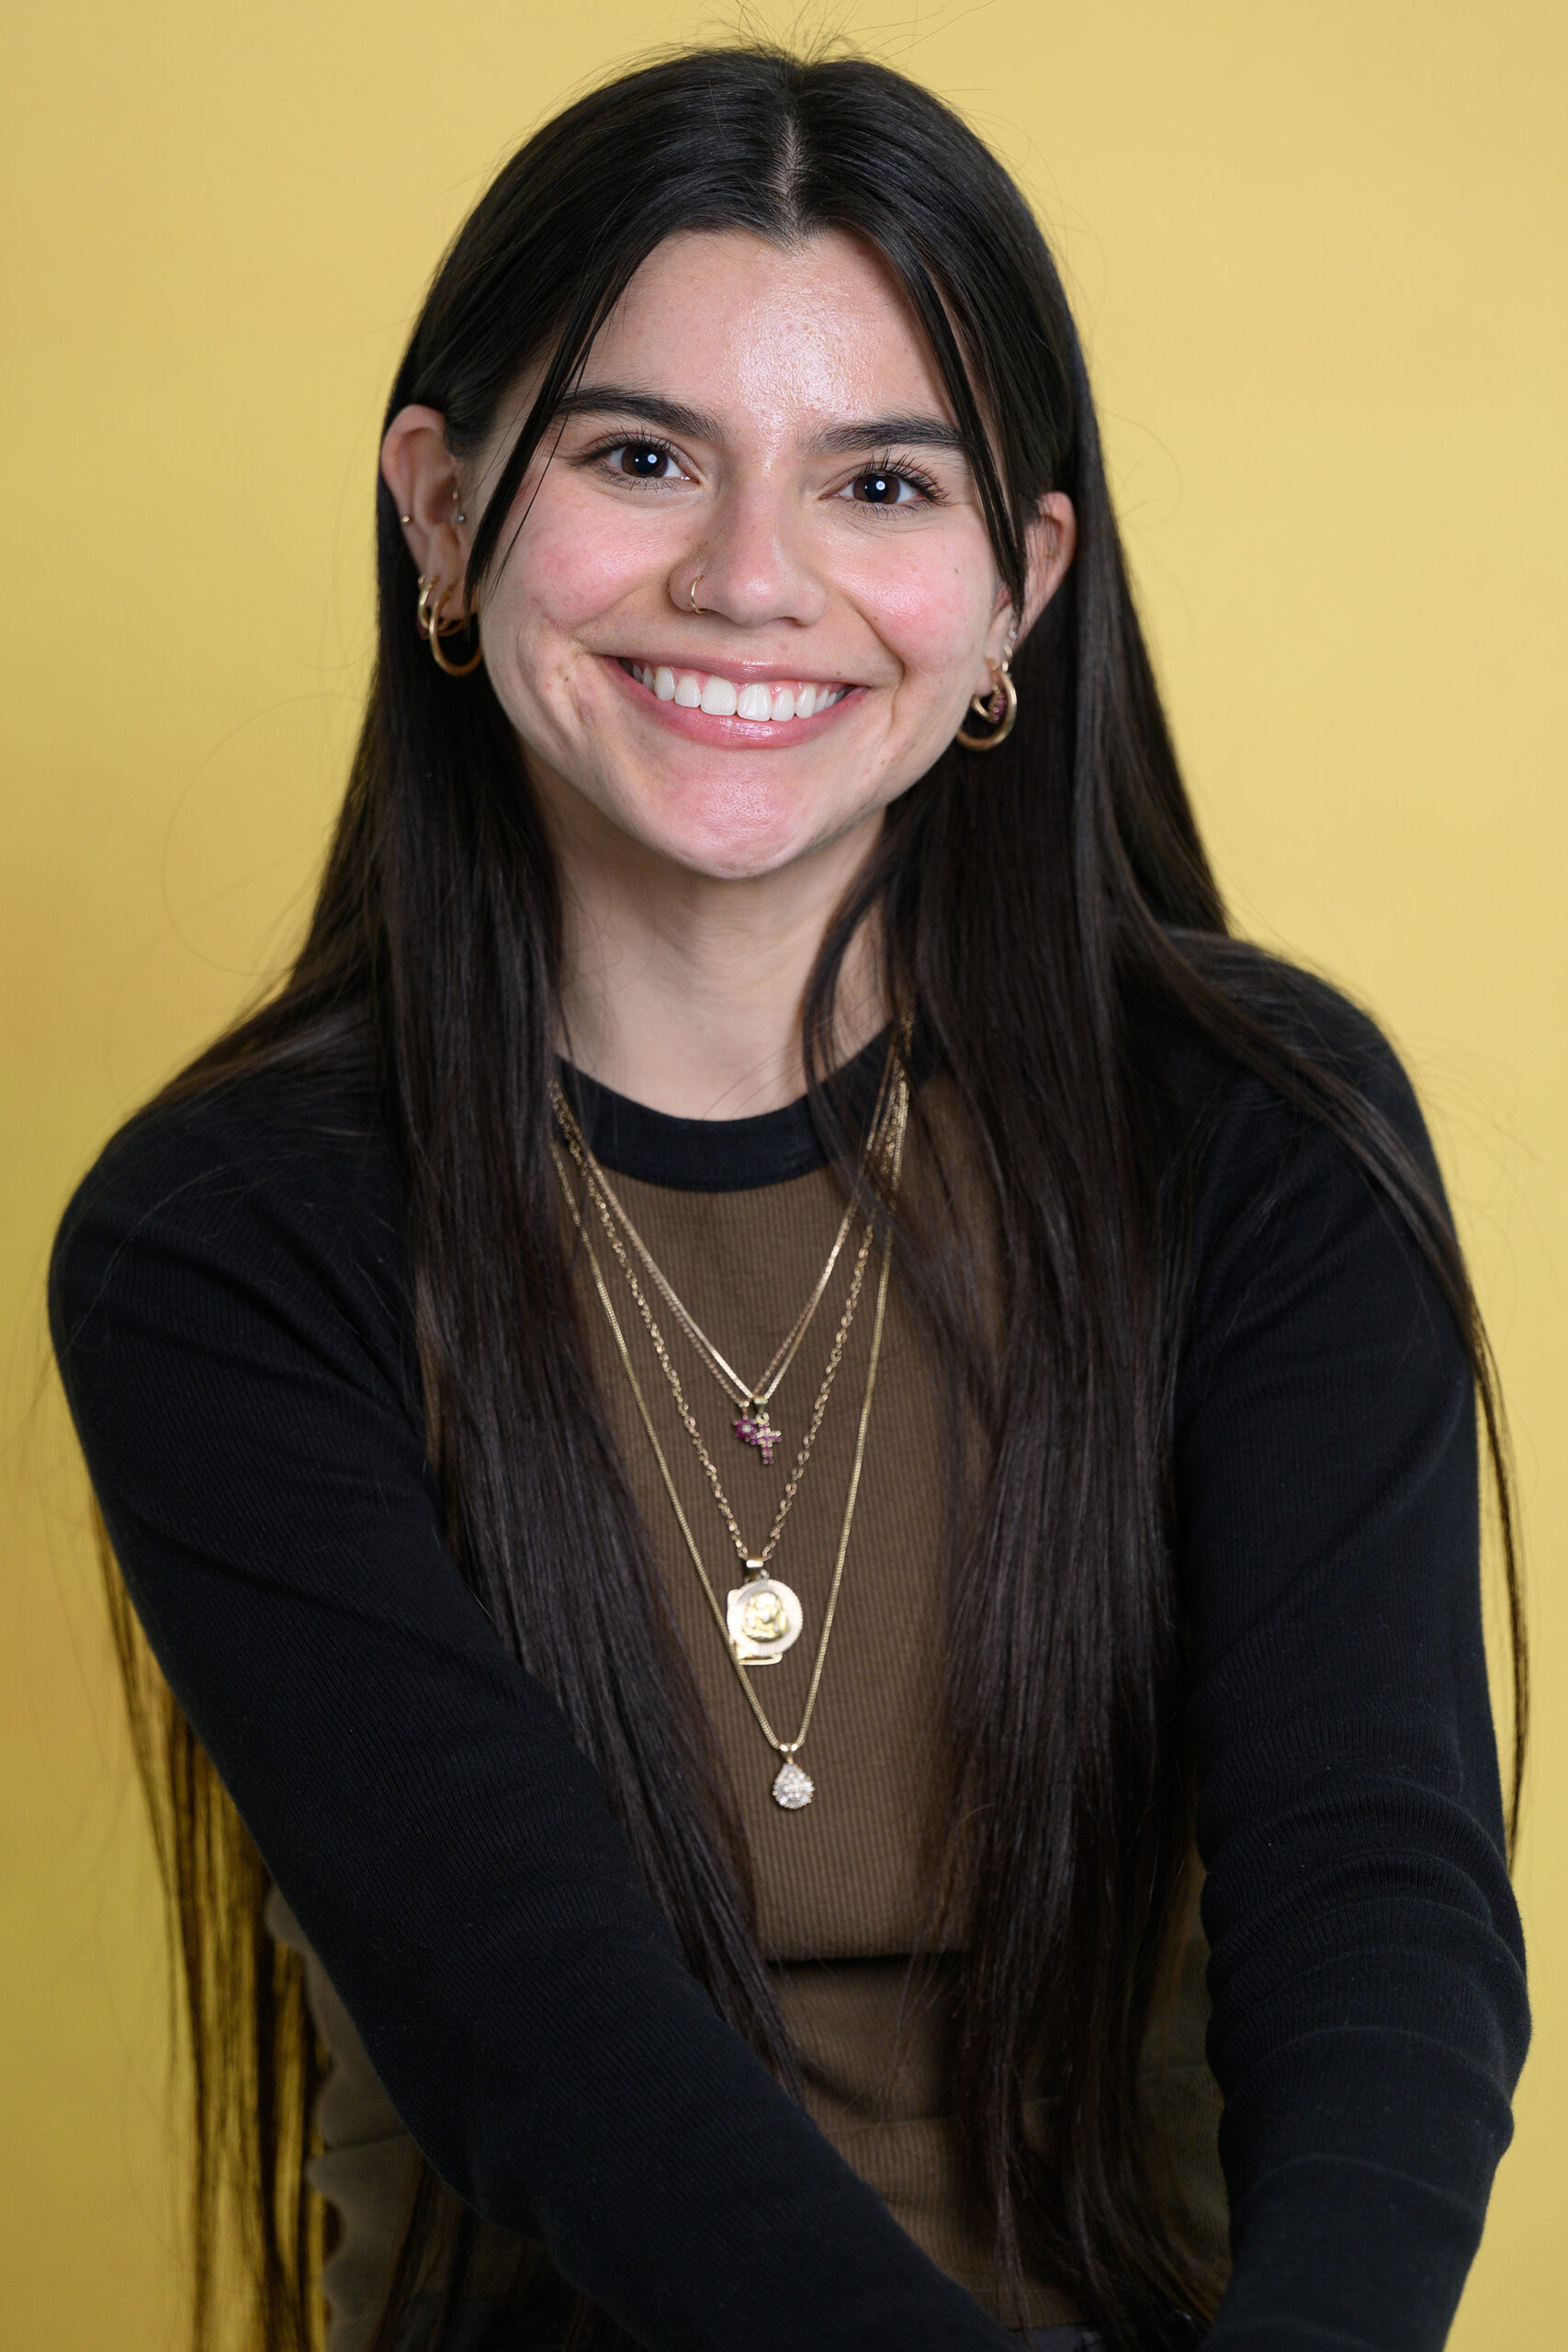 A female student is smiling in front of a yellow background